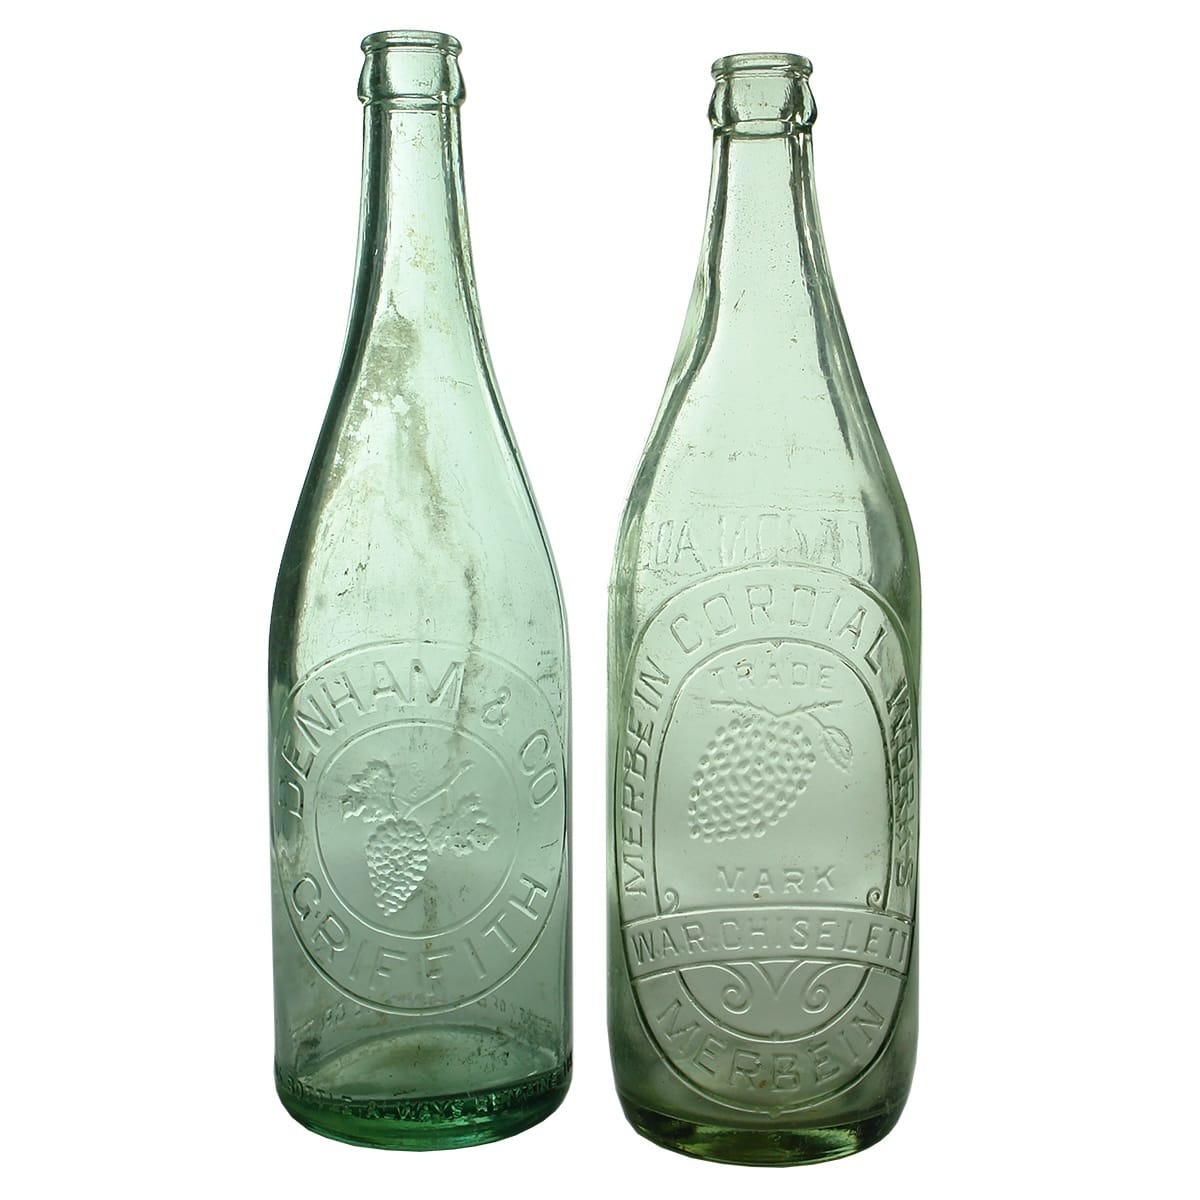 2 Crown Seals with Bunches of Grapes trade marks. Denham & Co., Griffith and W. A. R. Chiselett, Merbein Cordial Works. (New South Wales & Victoria)